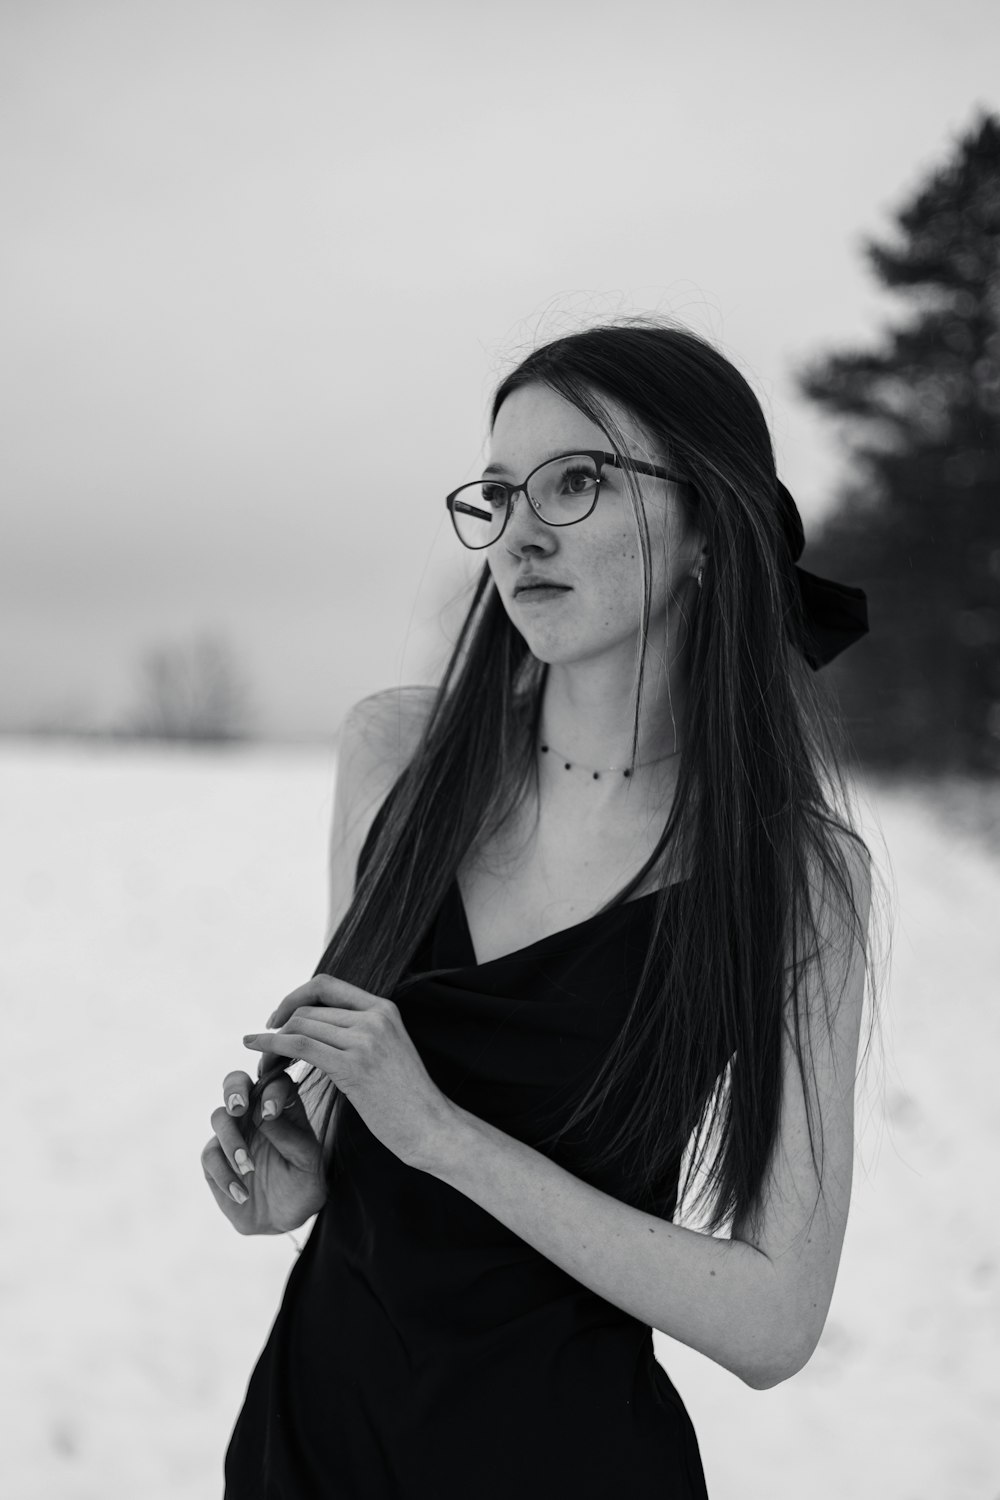 a woman with long hair and glasses standing in the snow